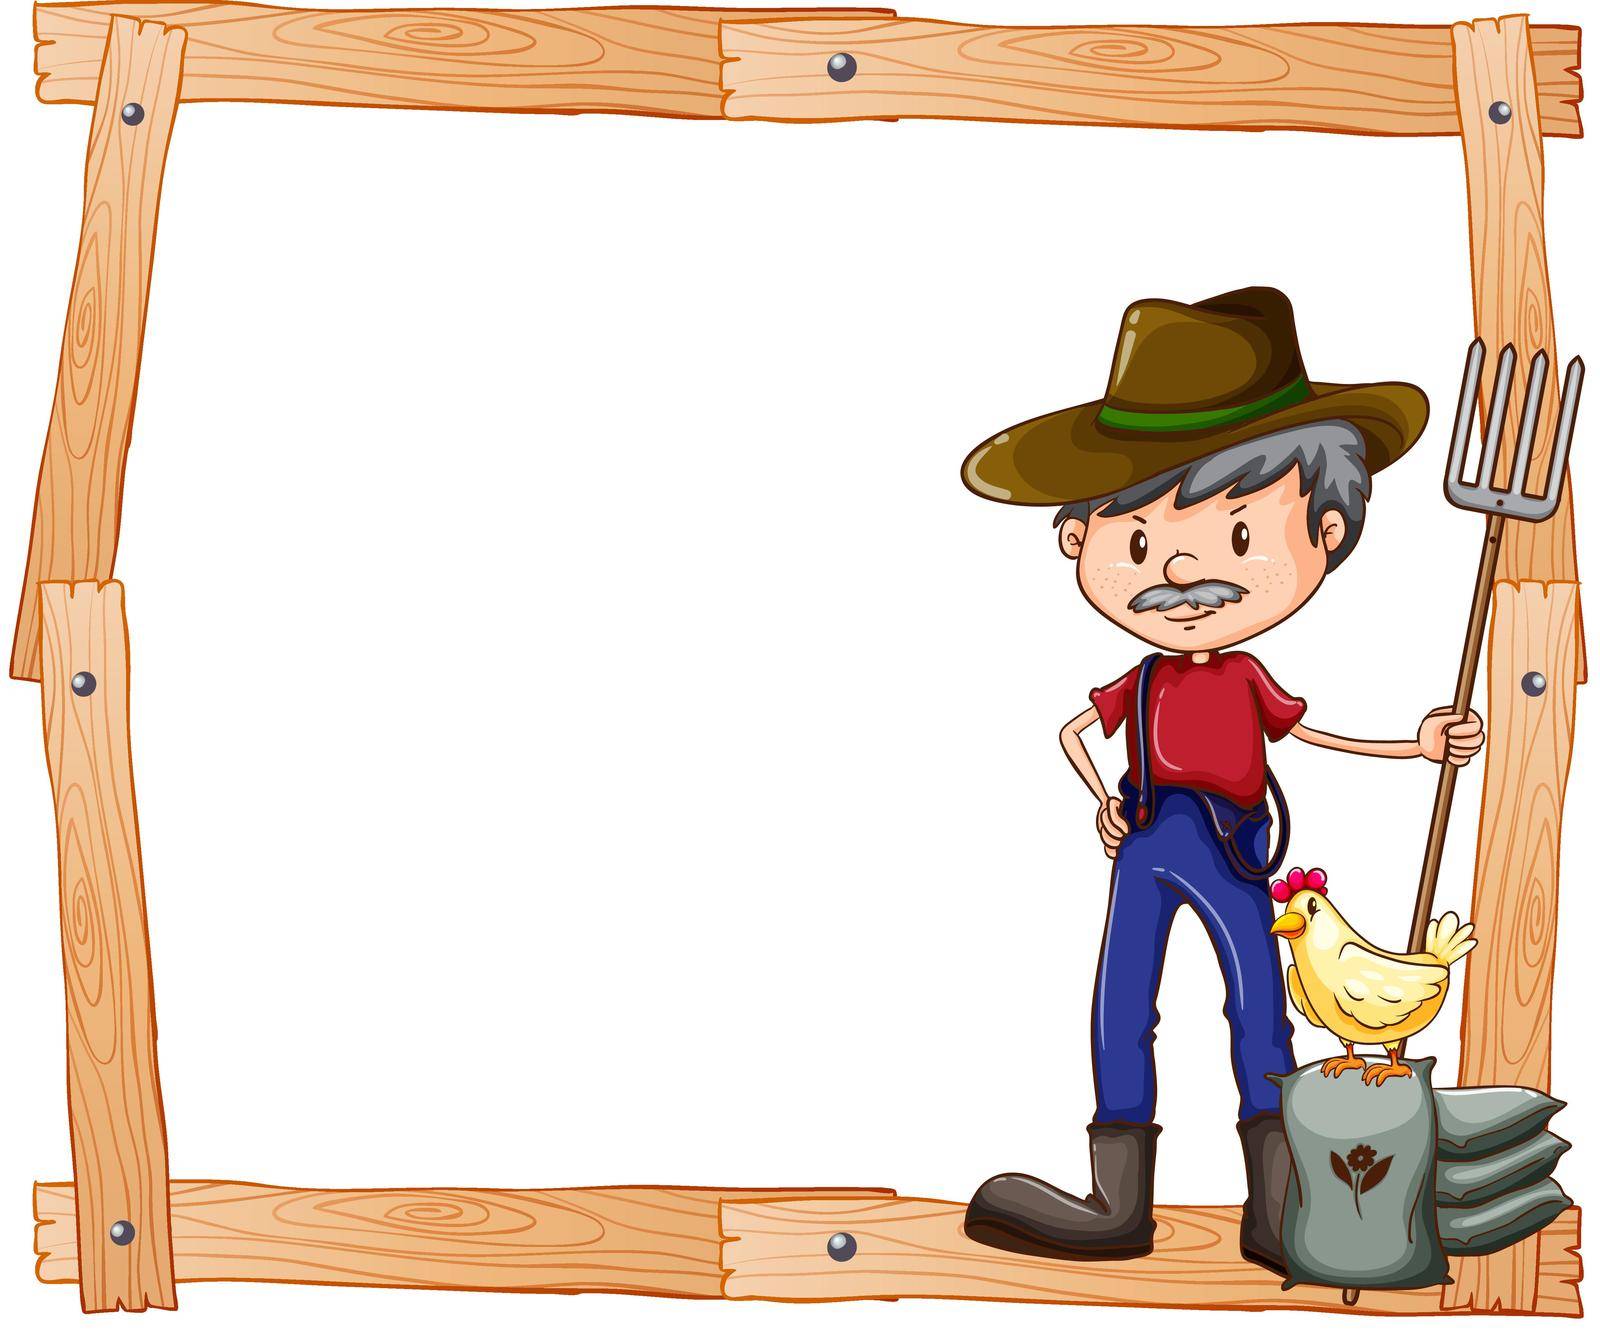 Poster with farmer theme frame